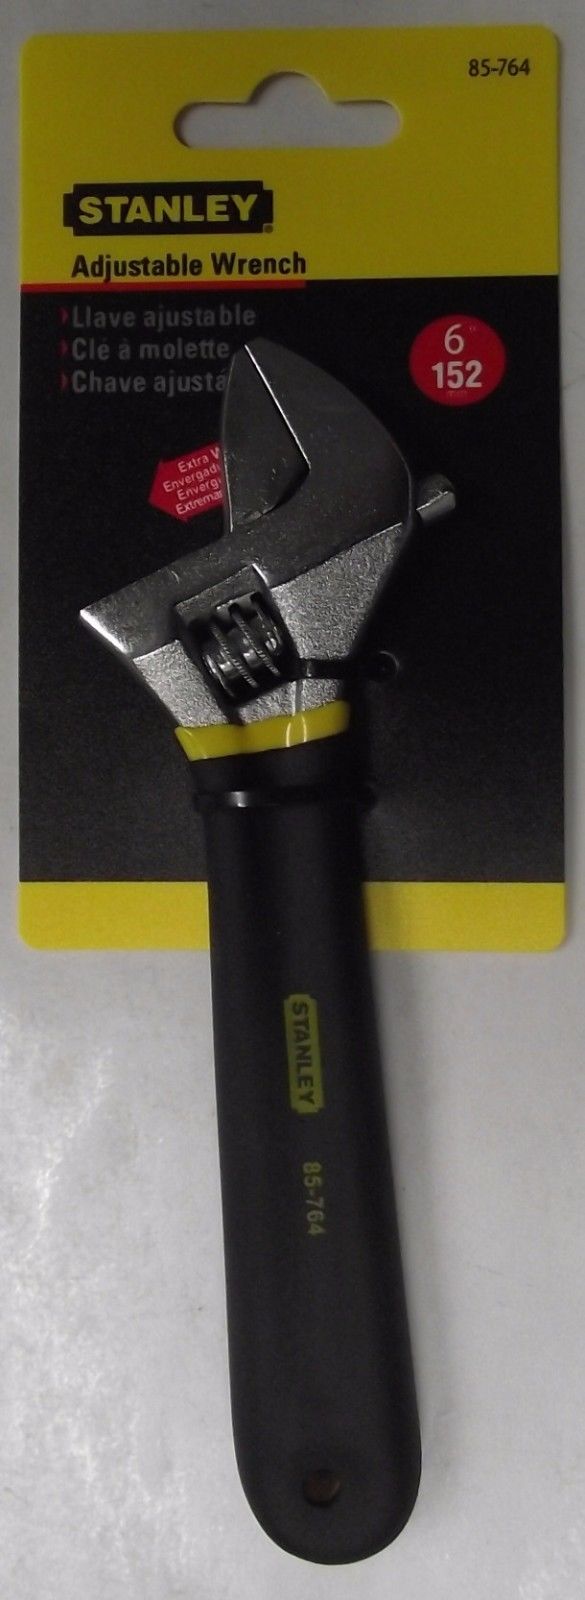 Stanley 85-764 6" Cushion Grip Adjustable Wrench